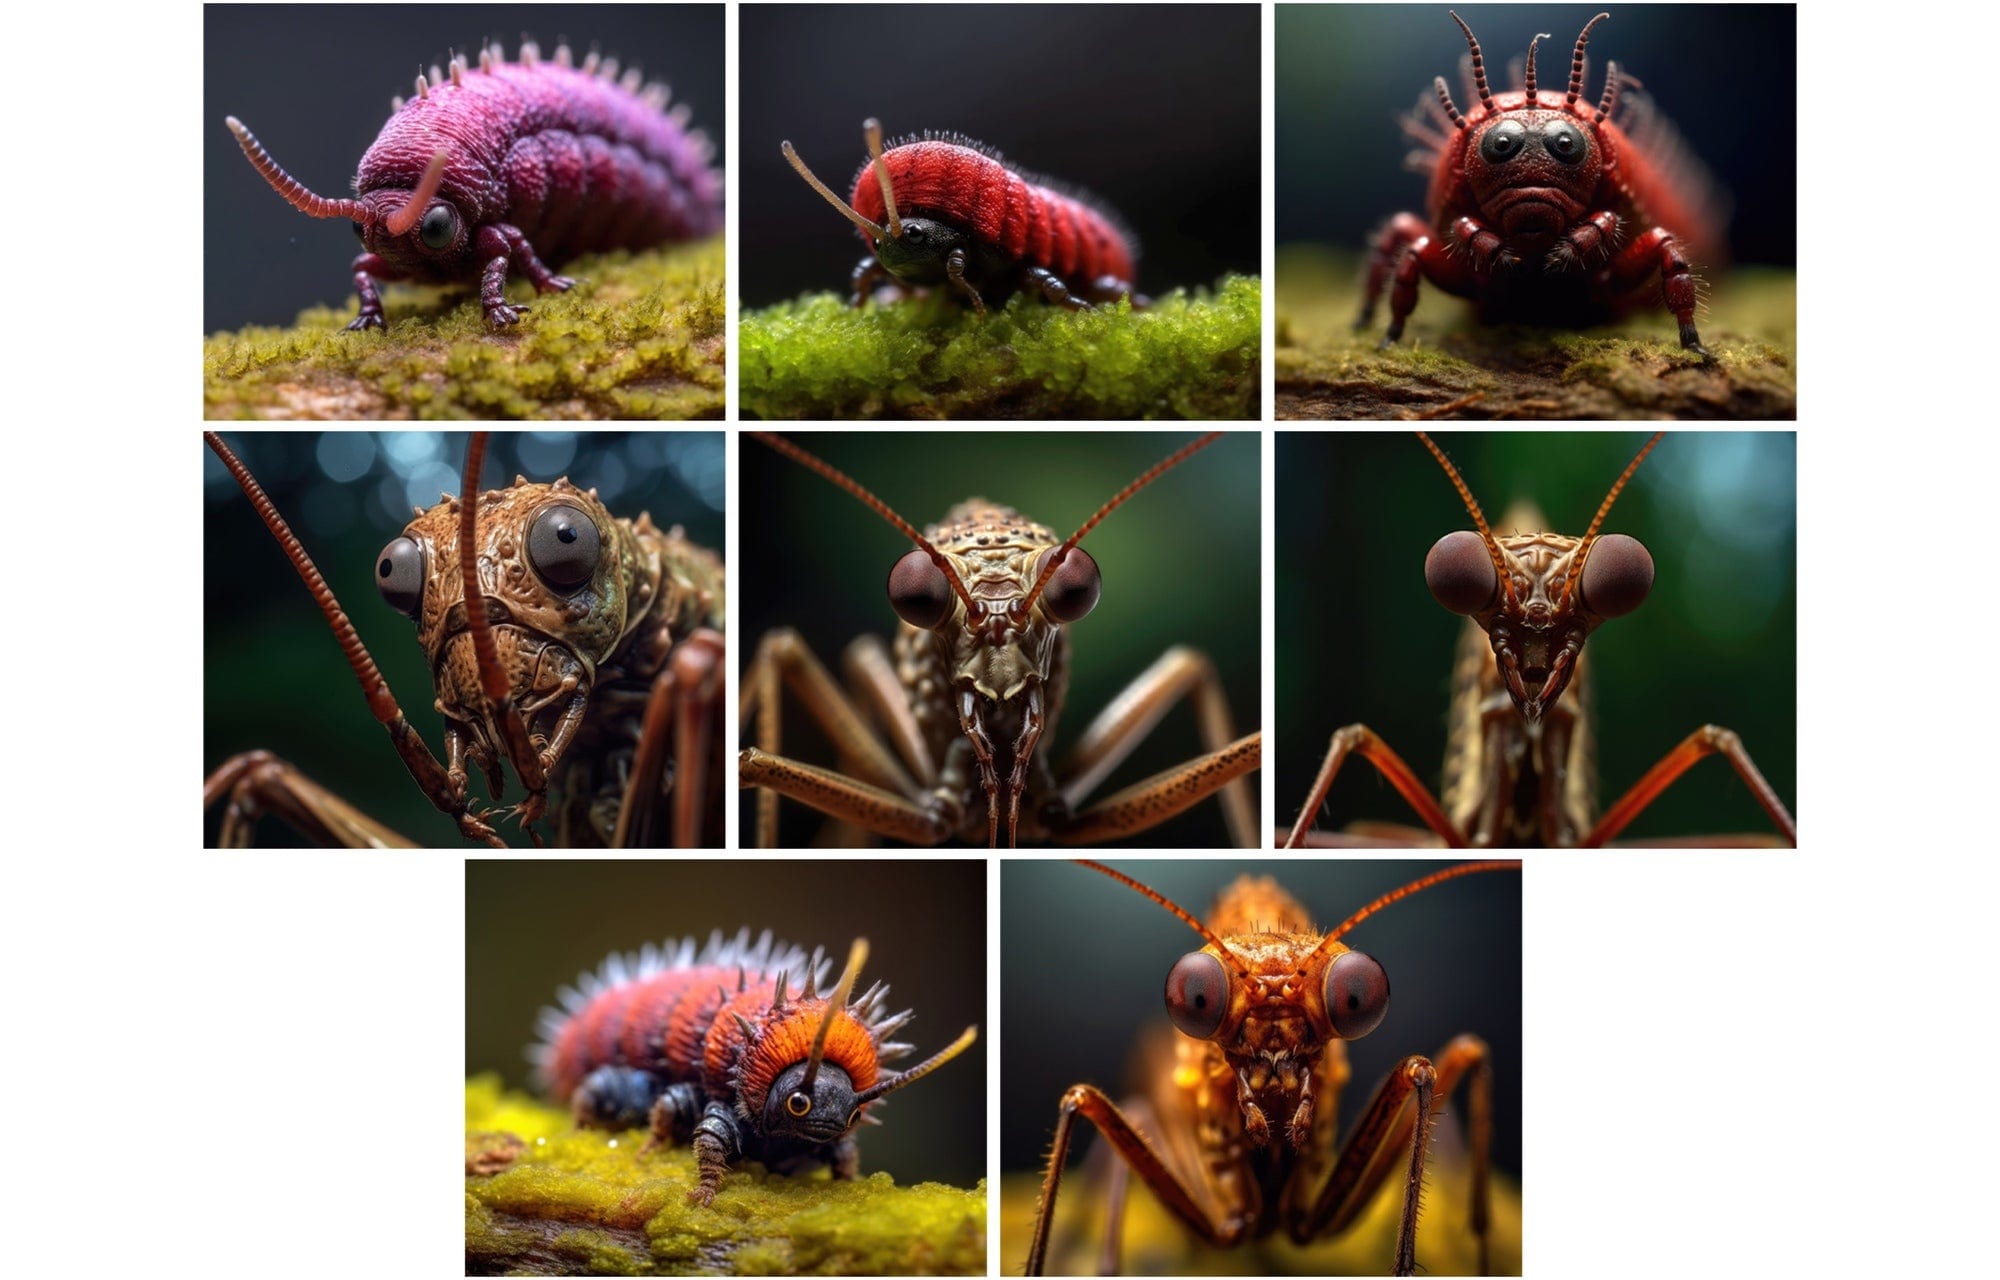 188 High-Resolution Macro Insect Images Bundle, Commercial License Included Digital Download Sumobundle